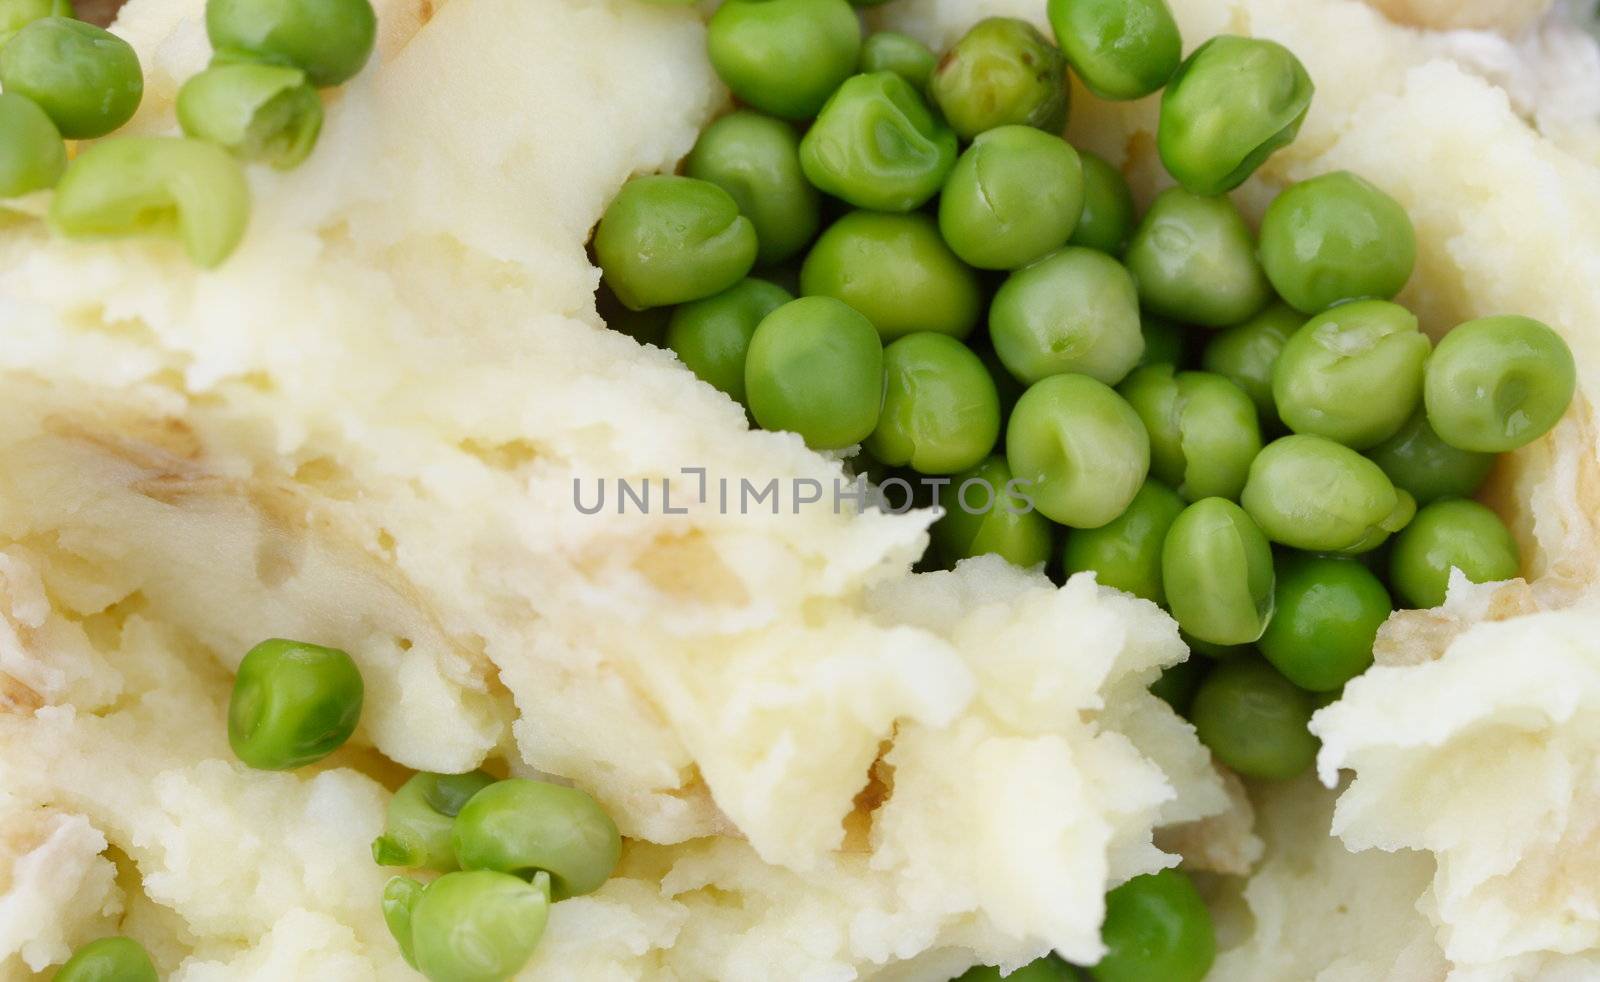 mashed potato and peas by mitzy